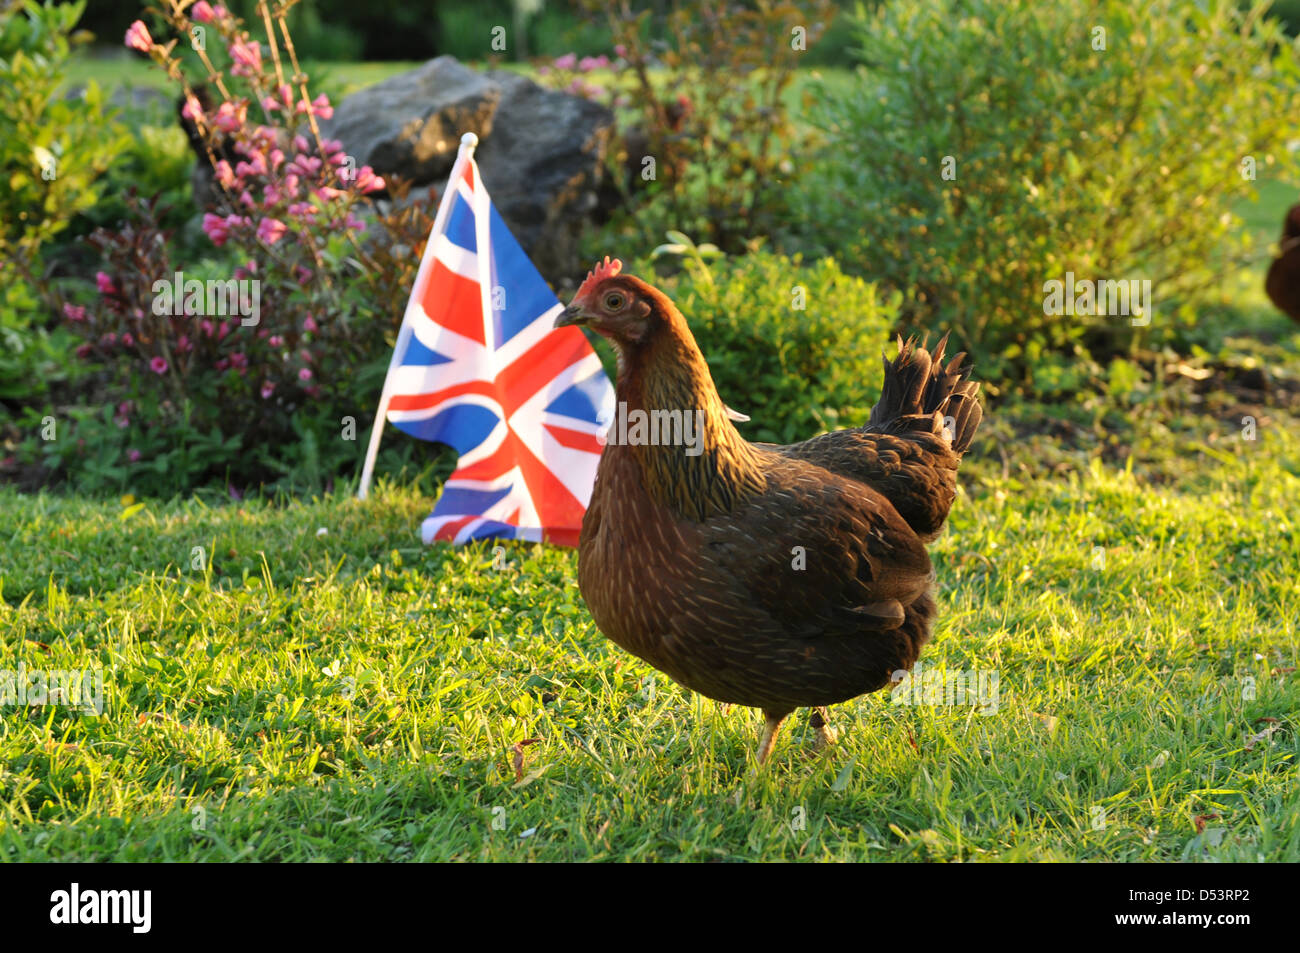 Single Welsummer hen in front of union jack flag england Stock Photo